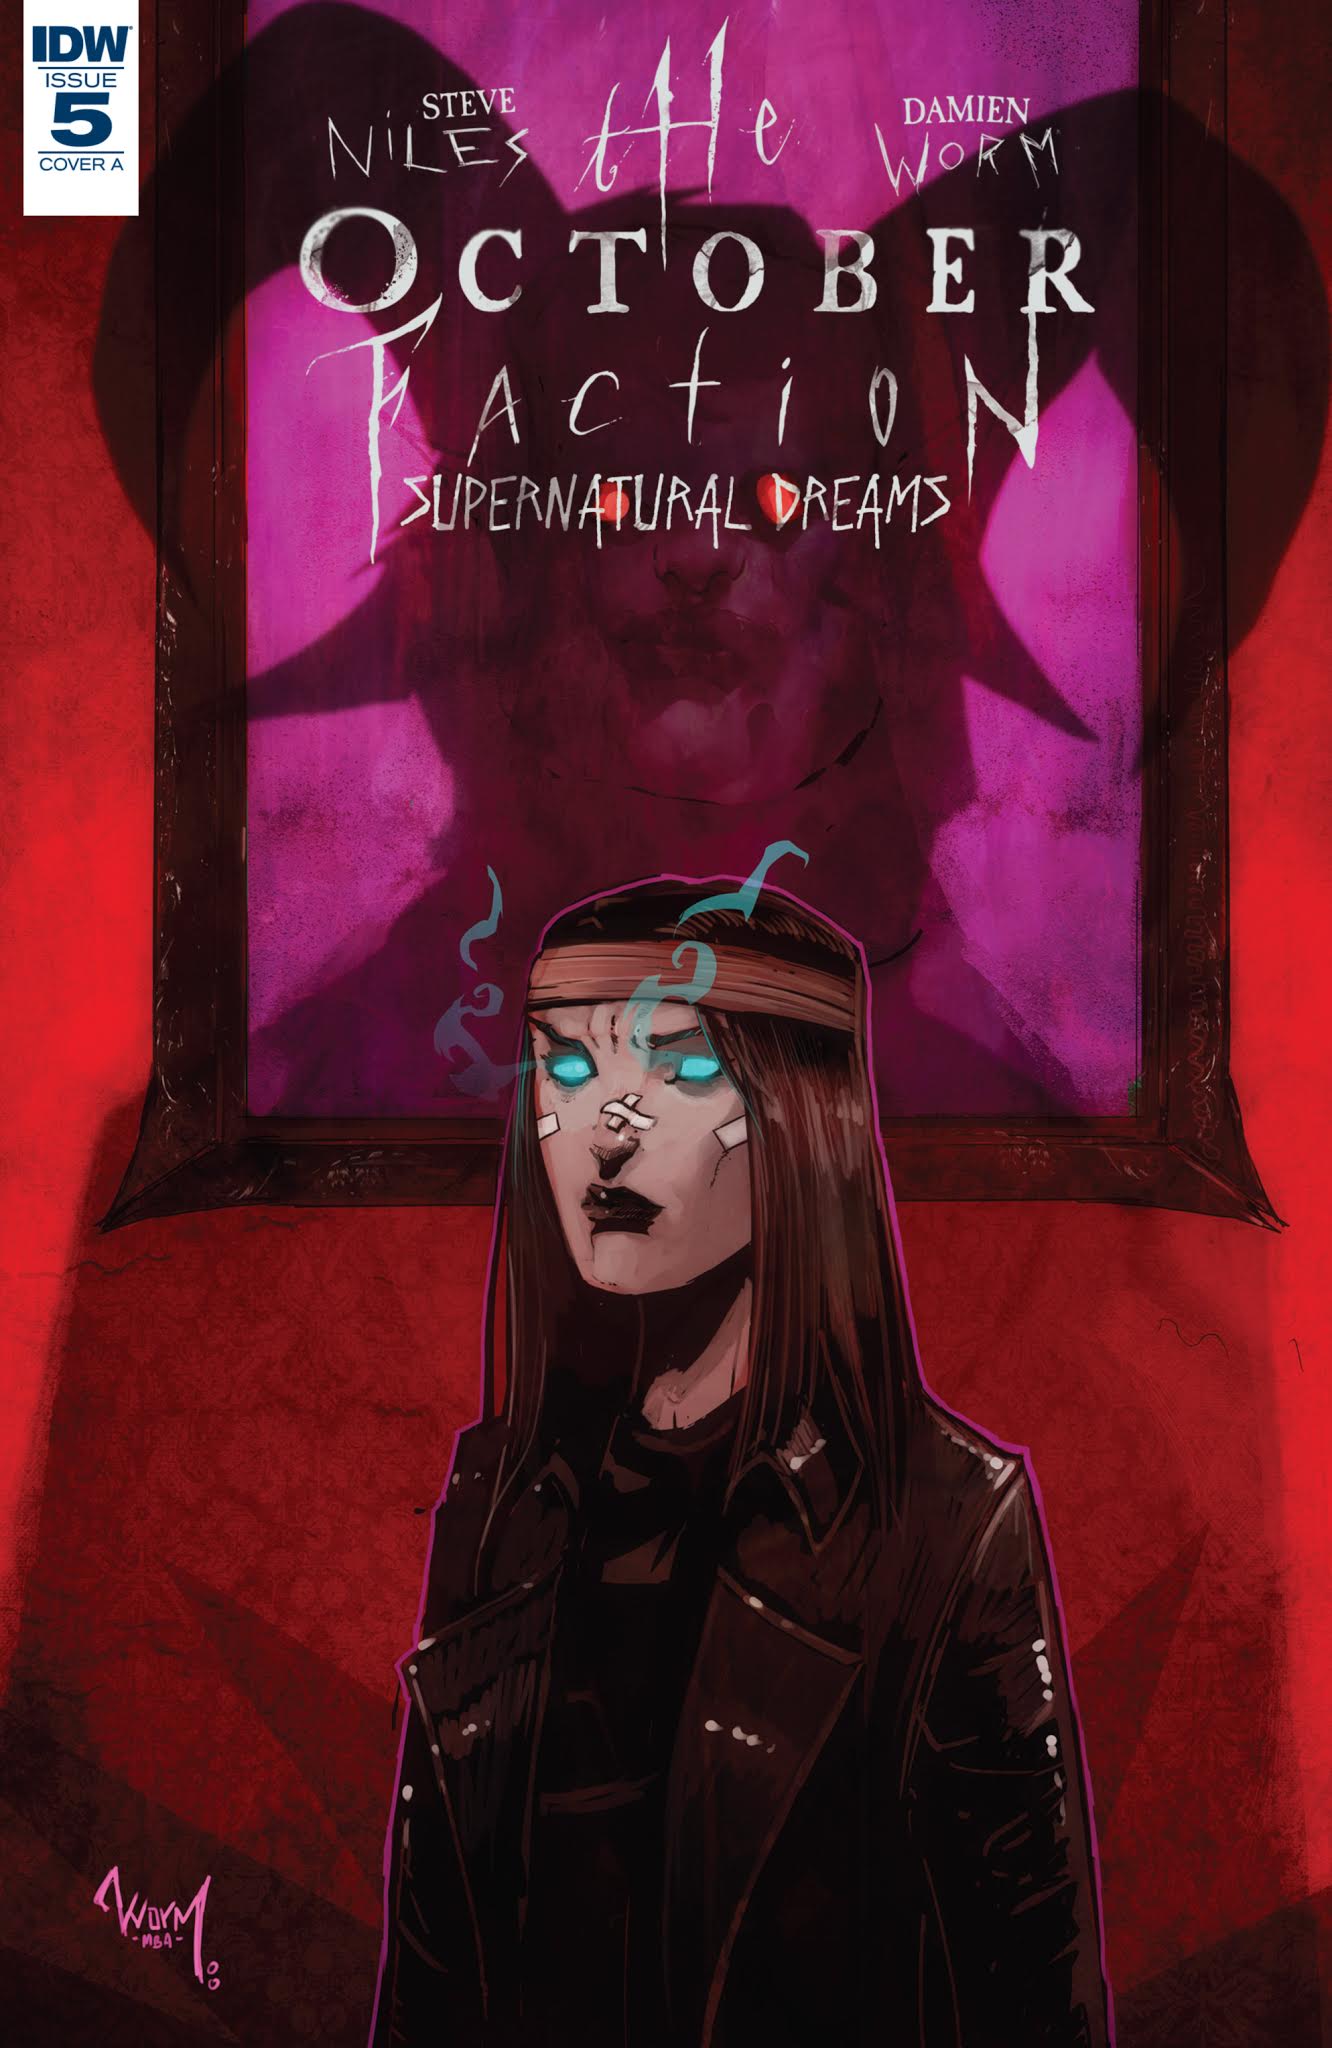 Read online October Faction: Supernatural Dreams comic -  Issue #5 - 1